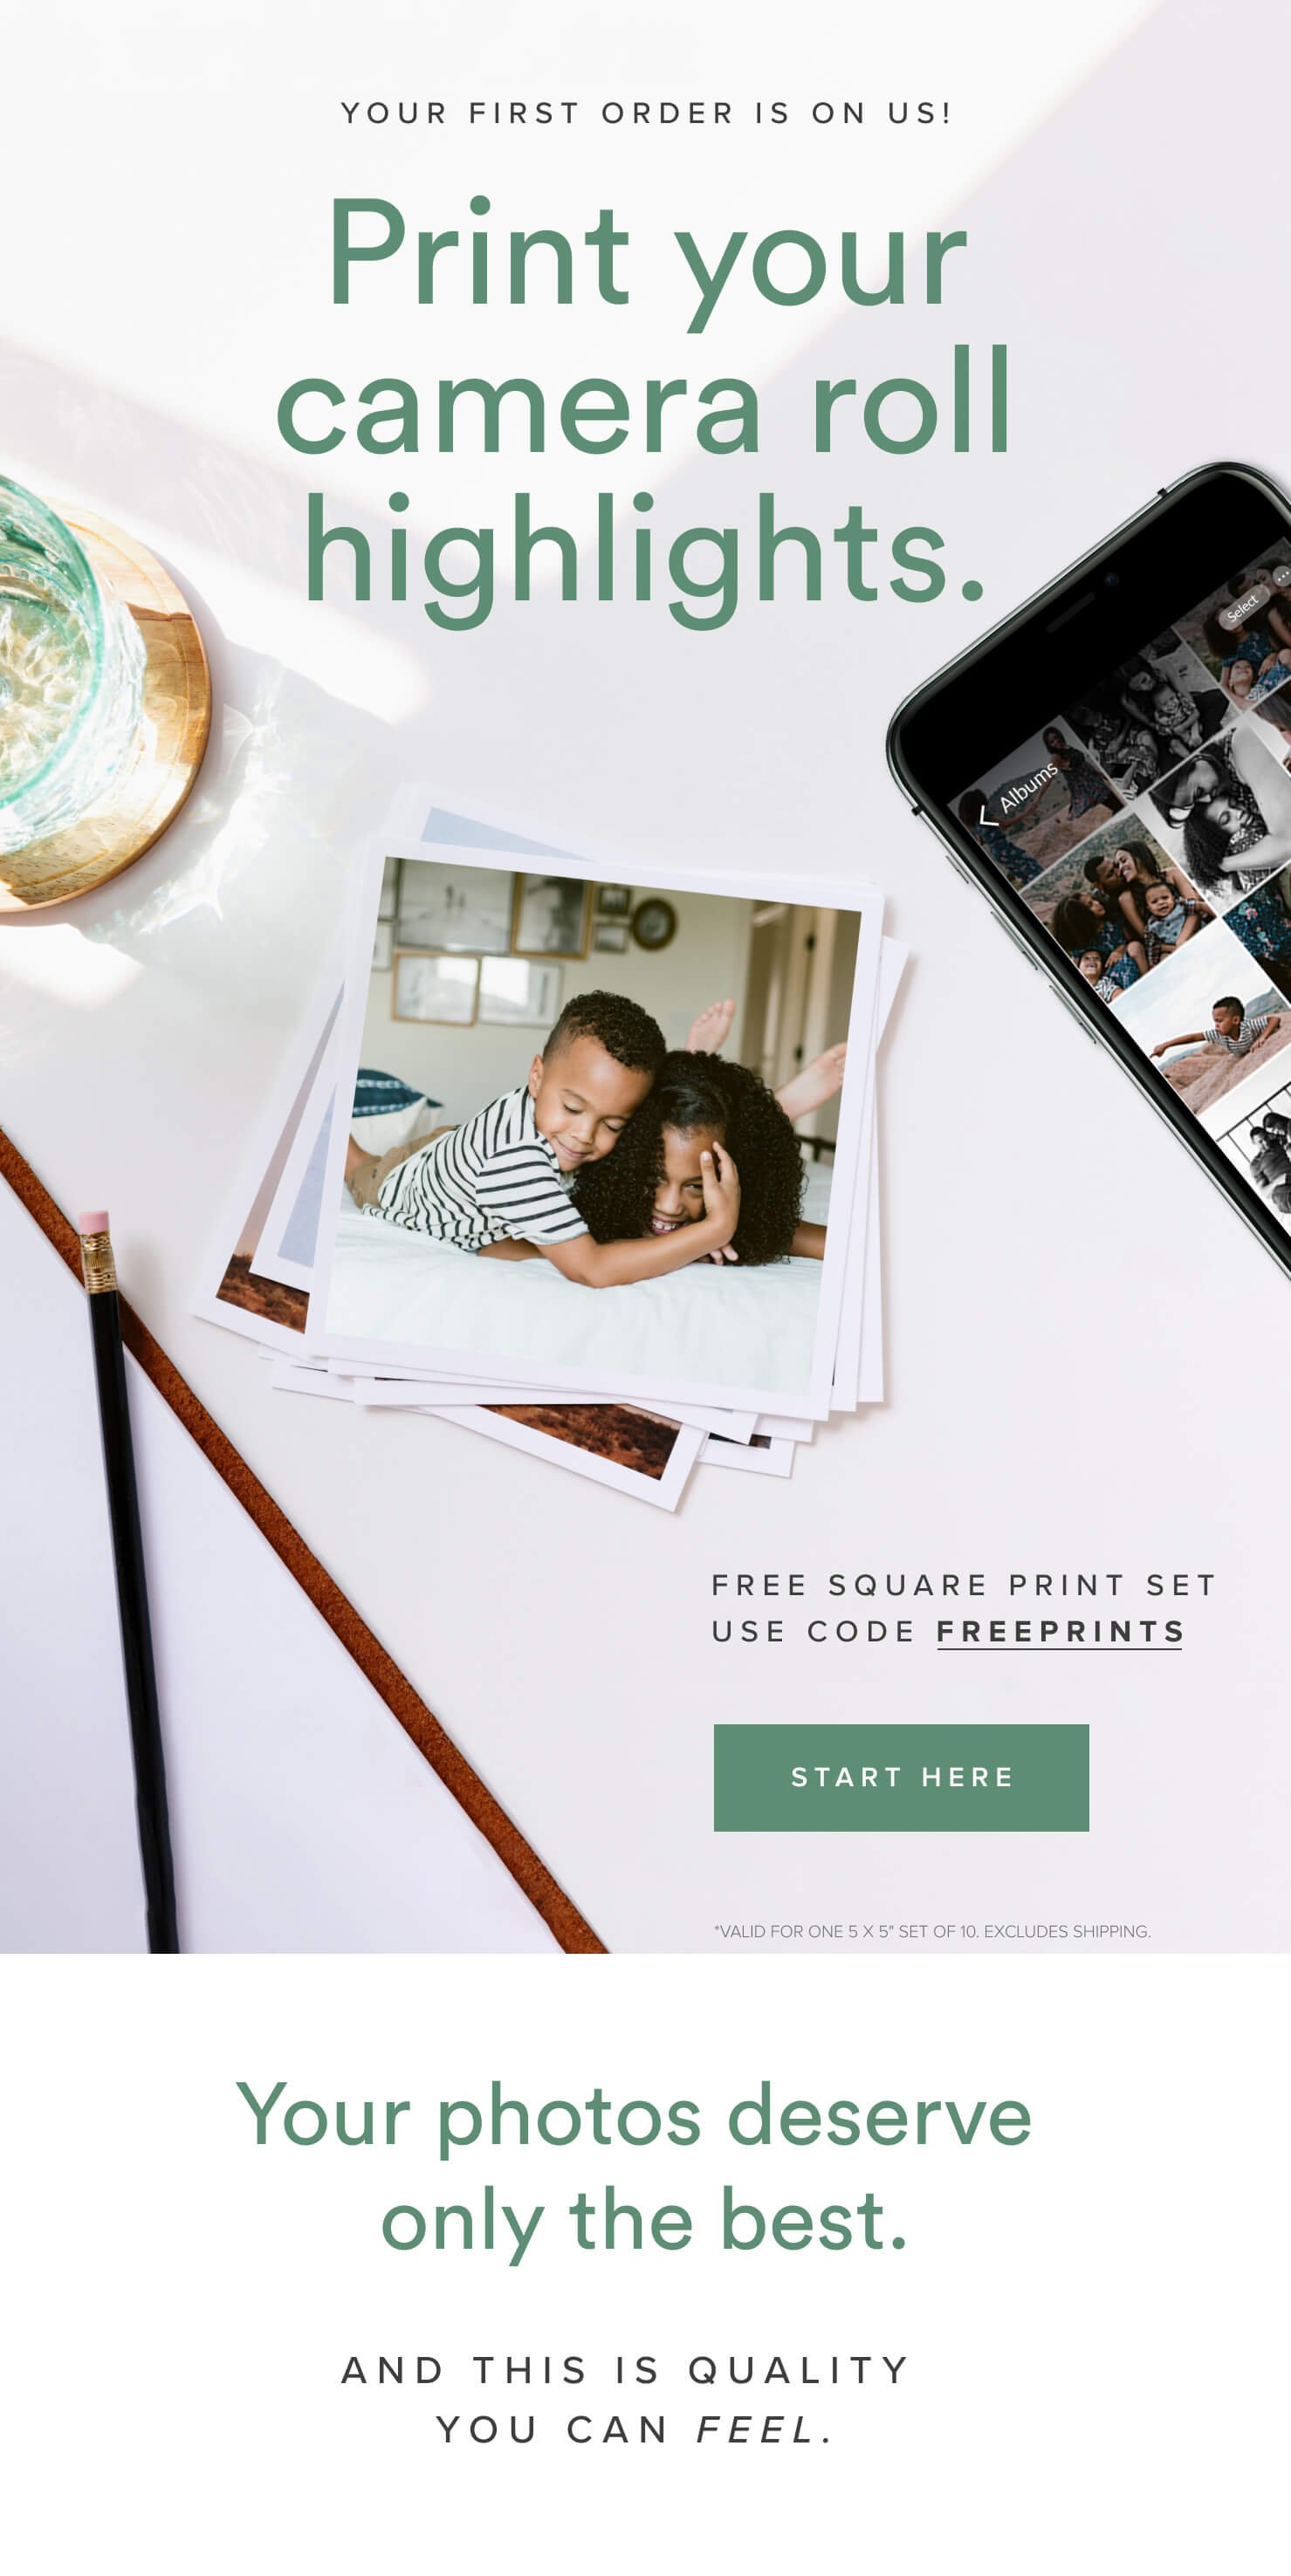 Your first order is on us! Print your camera roll highlights. Free Square Print Set • Use code FREEPRINTS *Valid for one 5 x 5 set of 10. Excludes shipping. | Start here